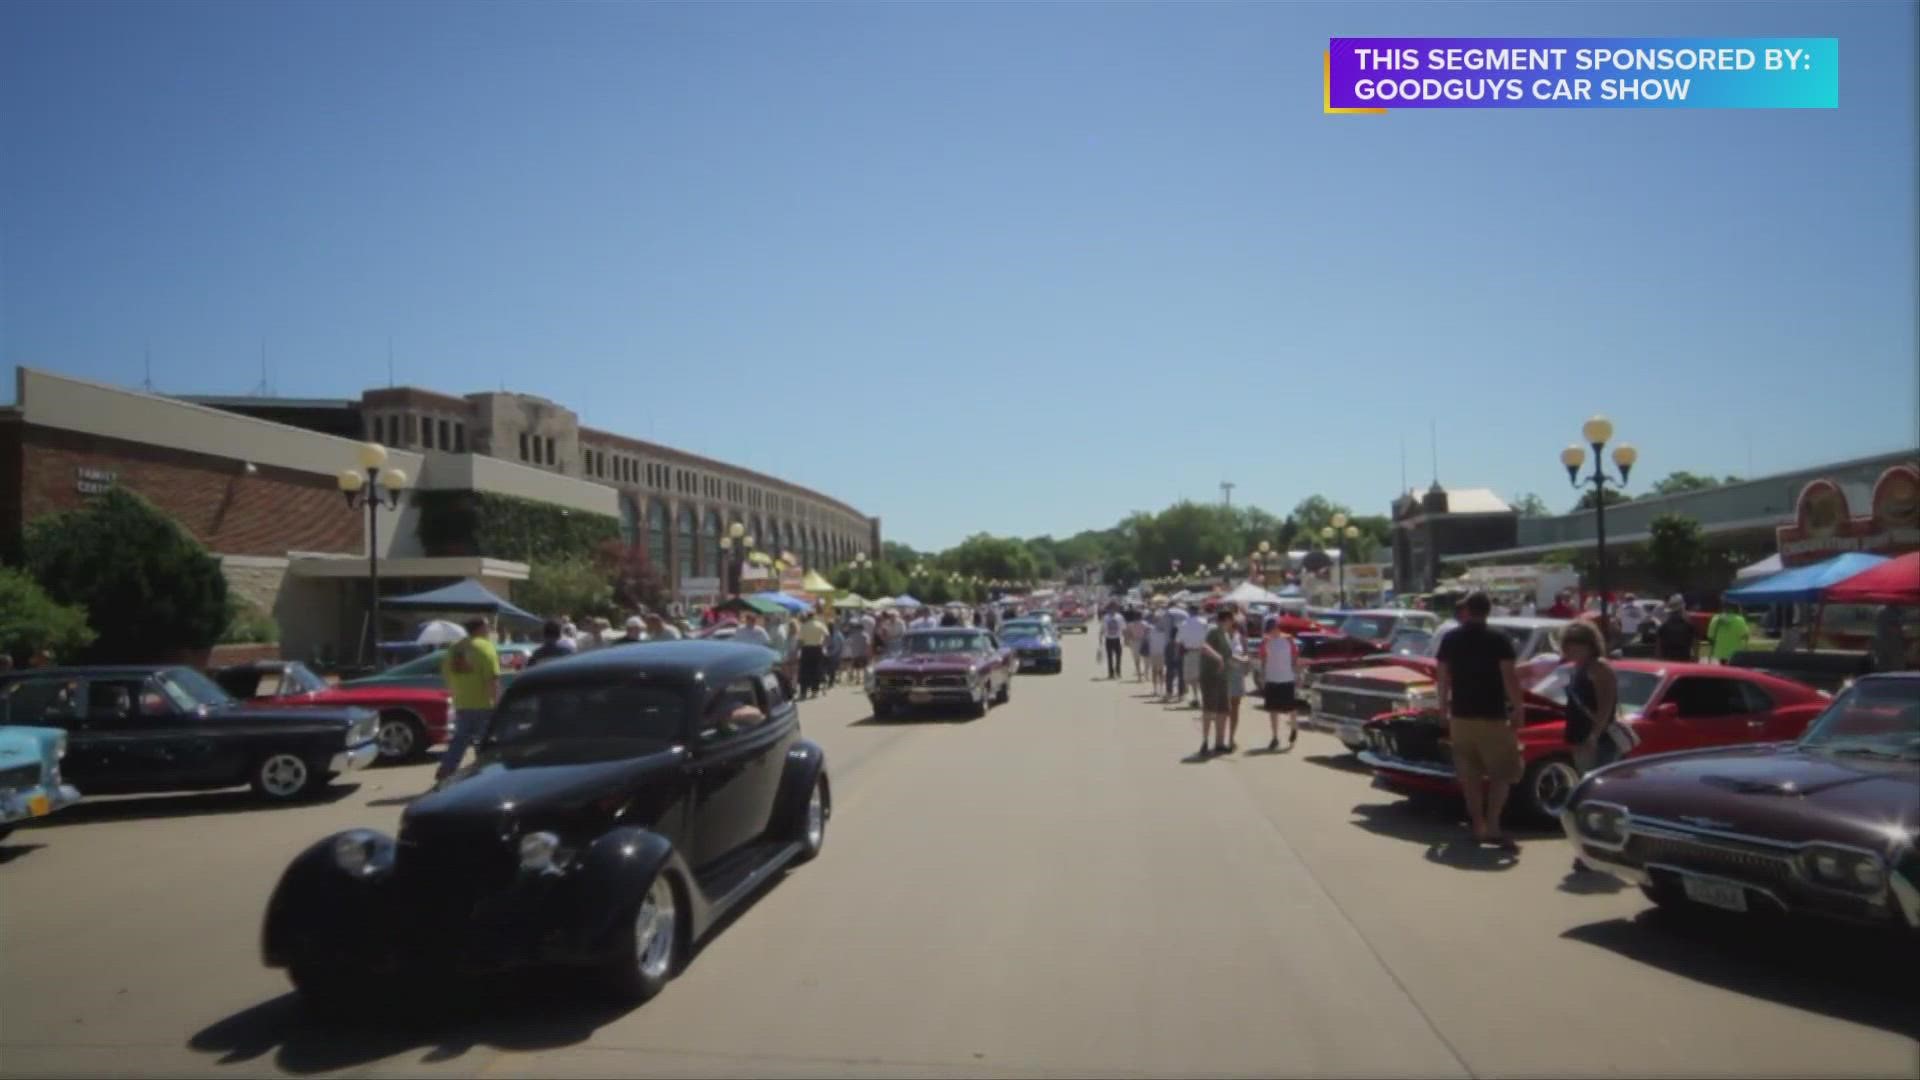 5000+ Vehicles expected for the GOOD GUYS Car Show at the Iowa State